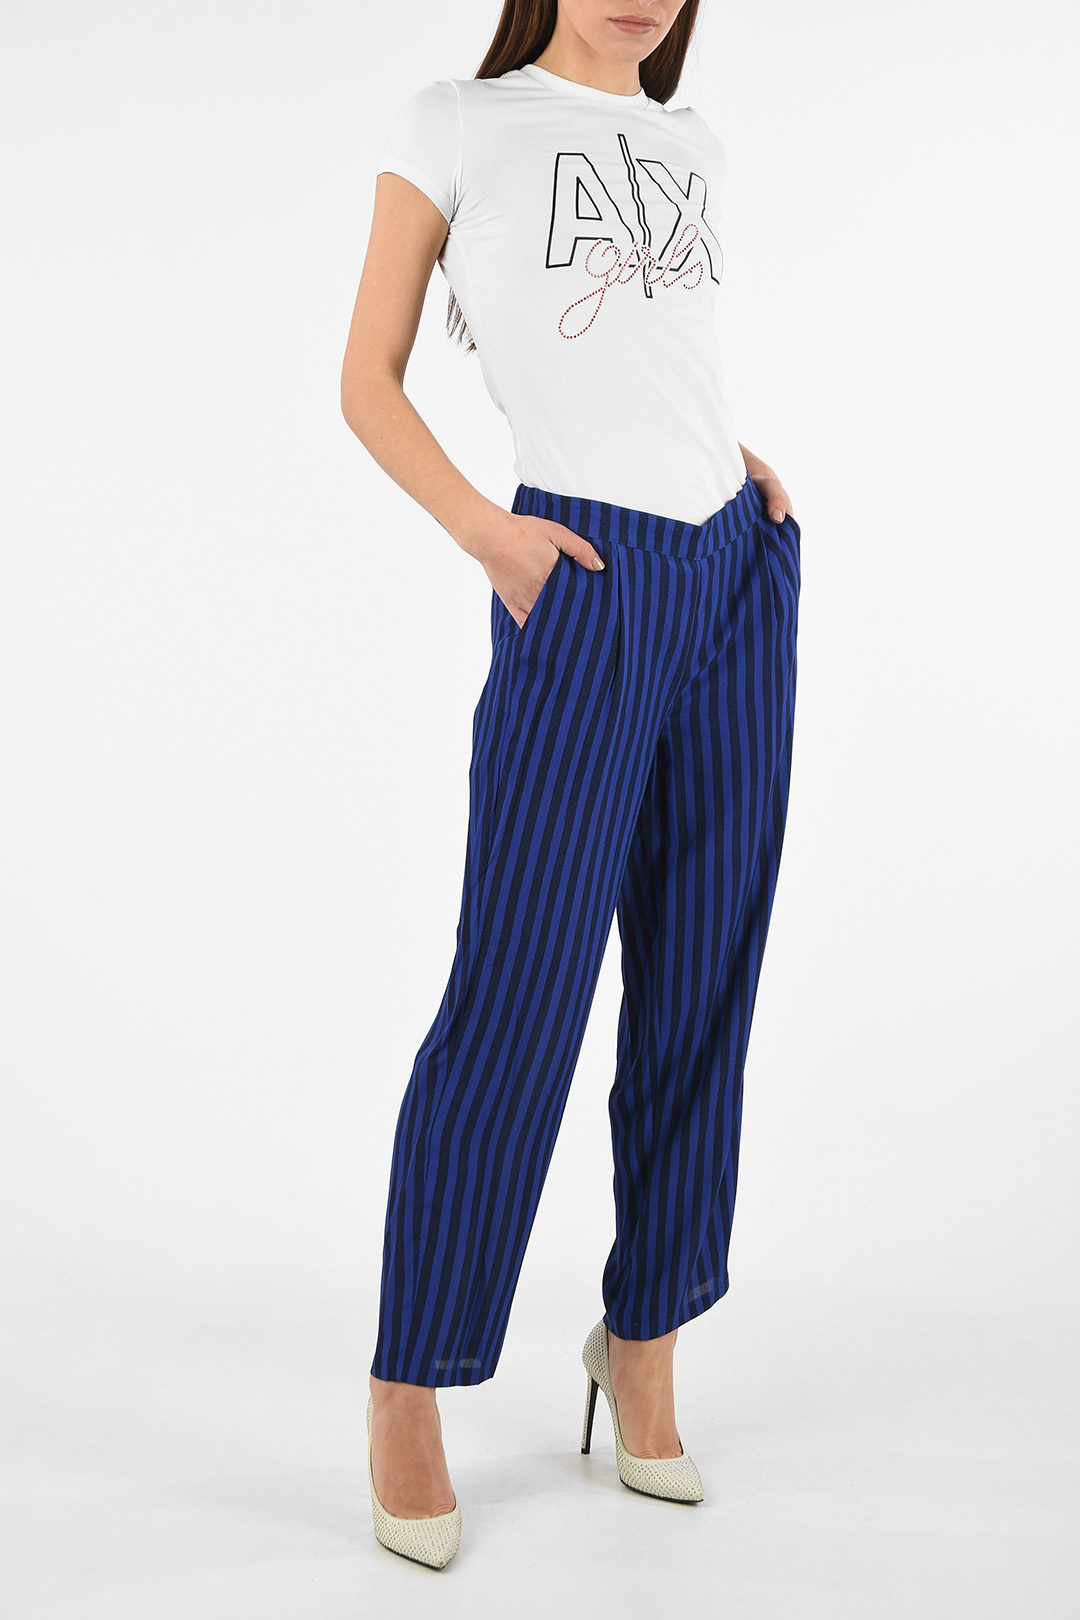 Buy Exclusive Emporio Armani Stretch Trousers  Women  1 products   FASHIOLAin